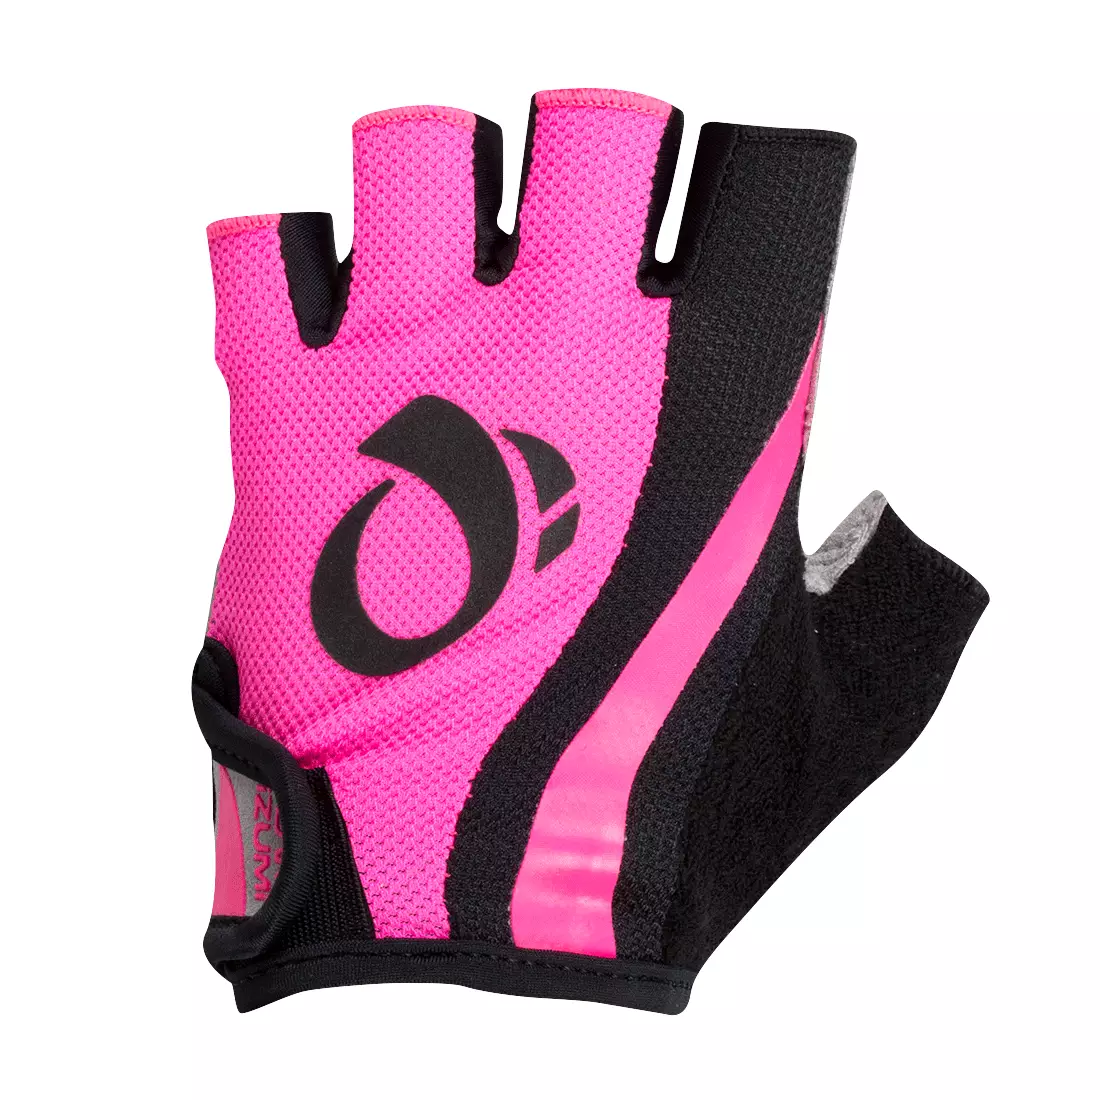 PEARL IZUMI SELECT women's cycling gloves pink 14241803